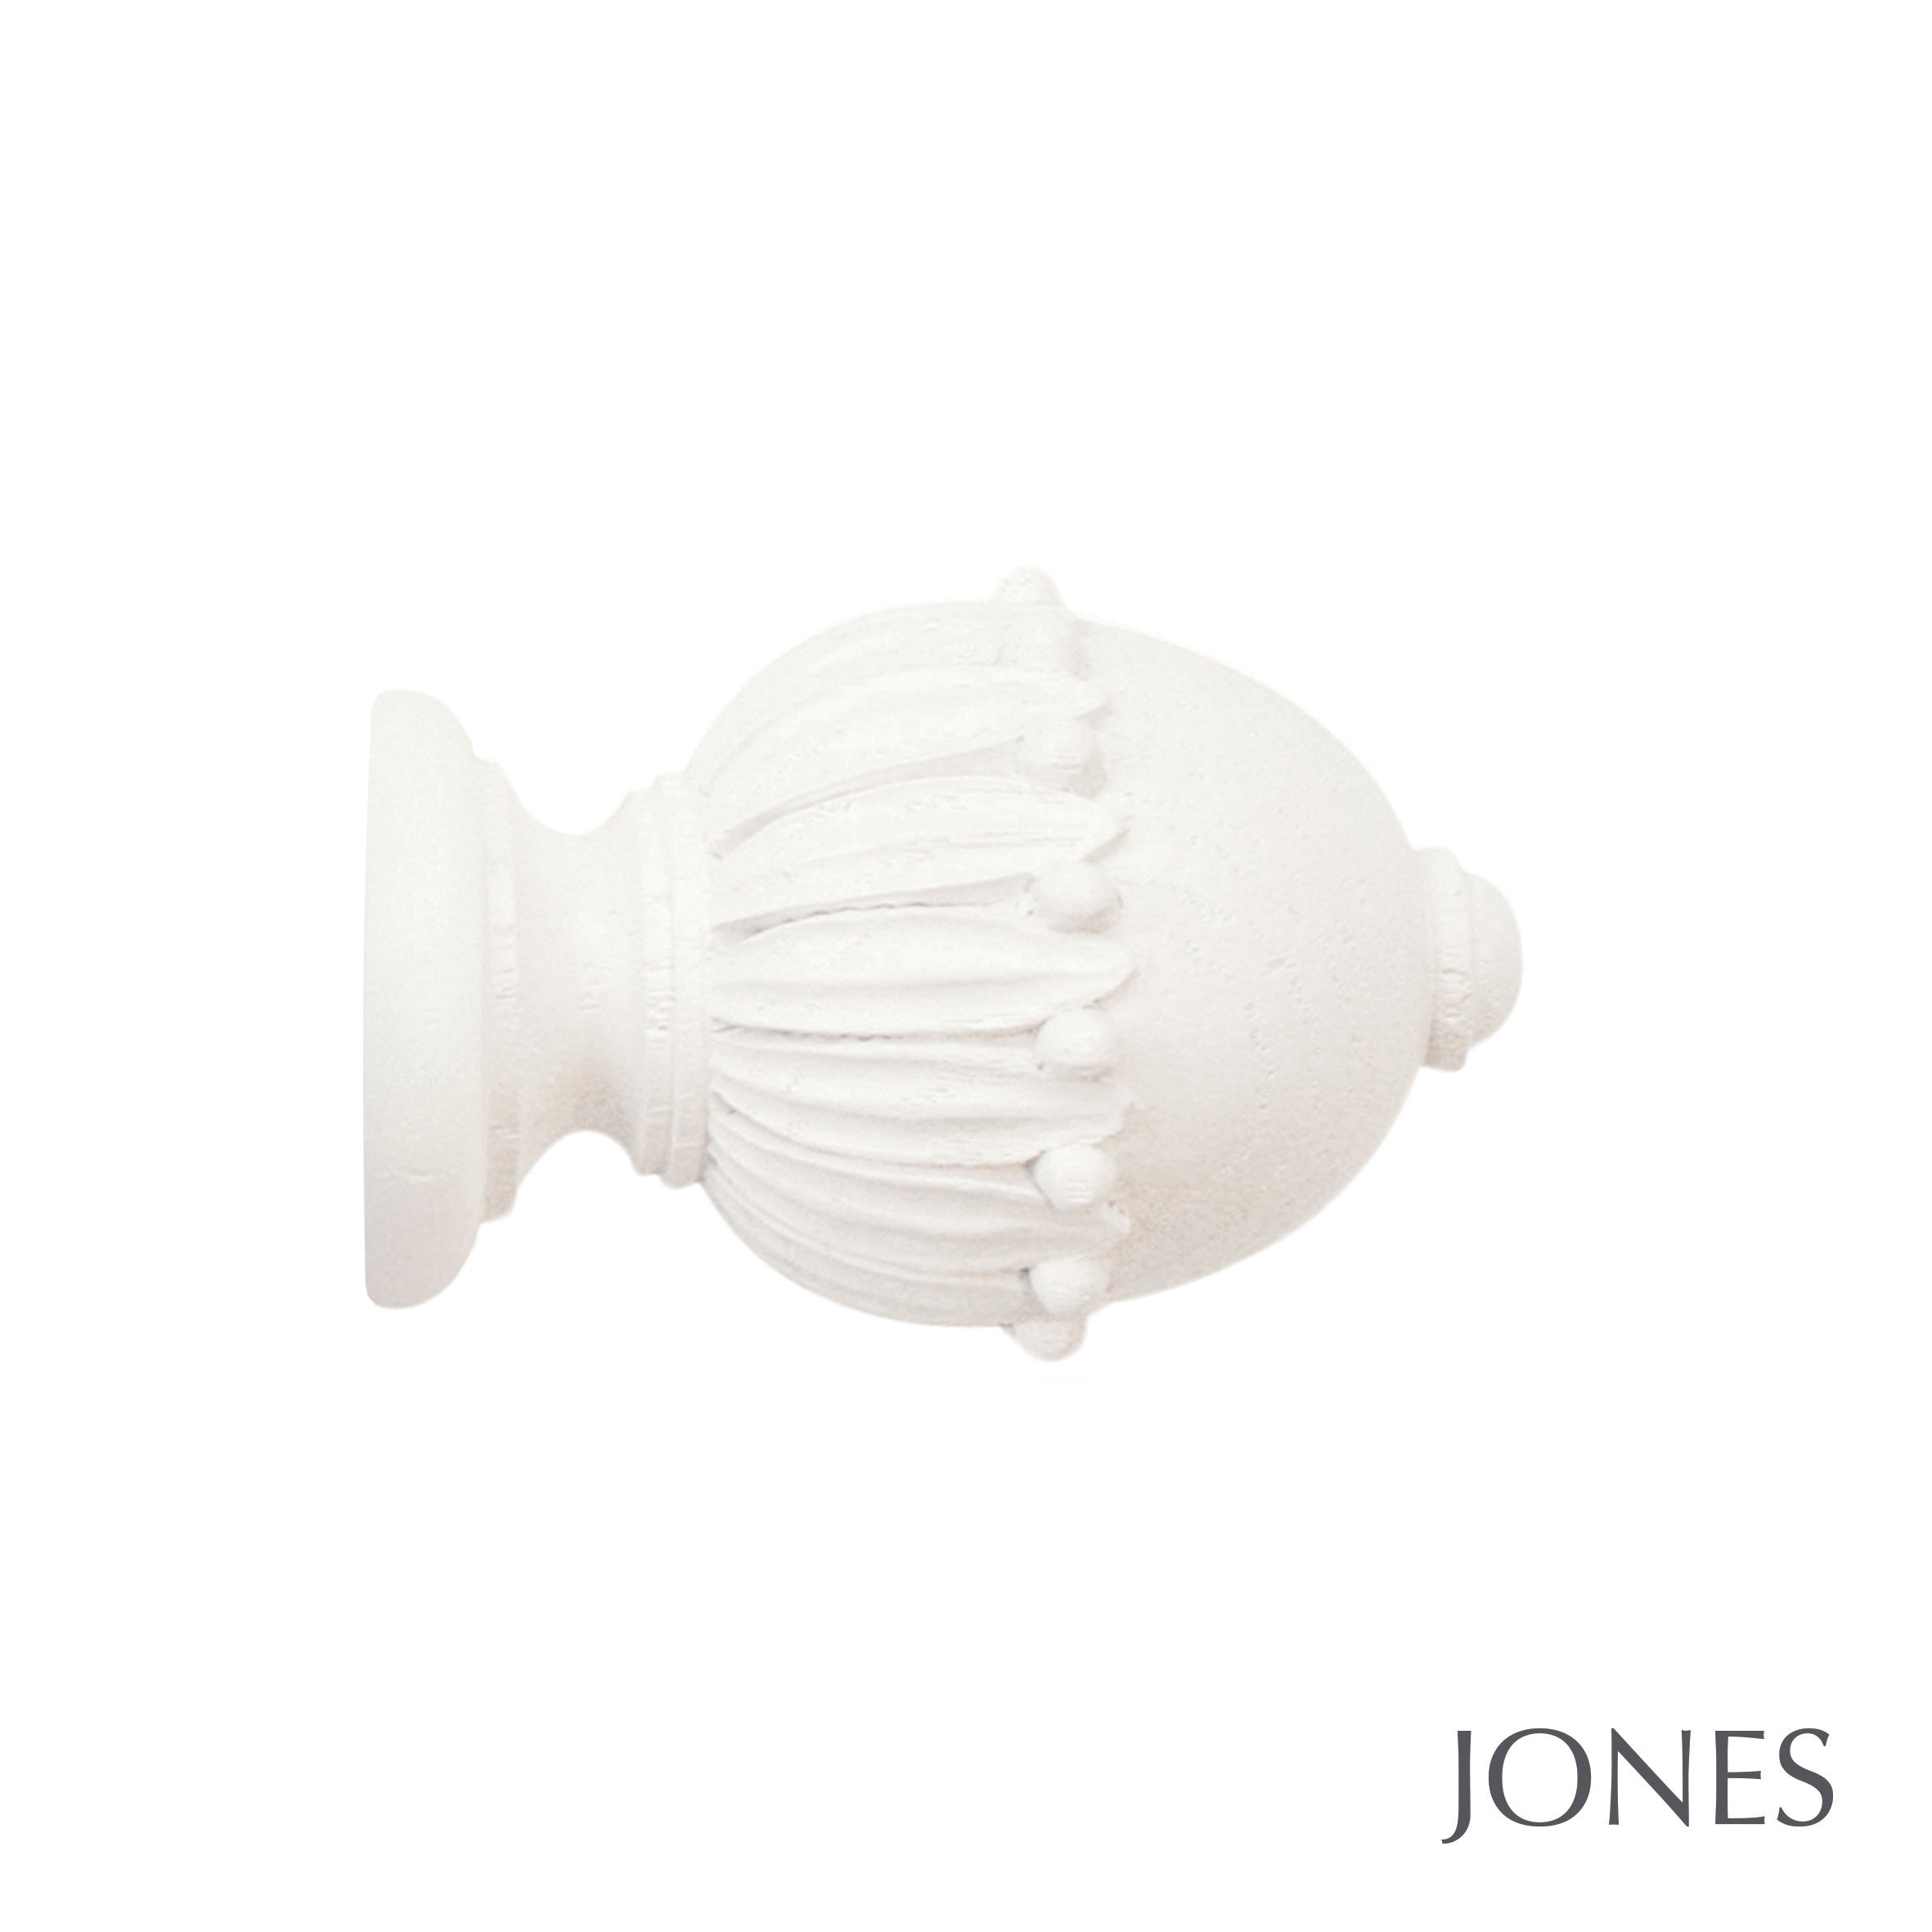 Jones Interiors Cathedral Wells Finial Curtain Pole Set in Cotton